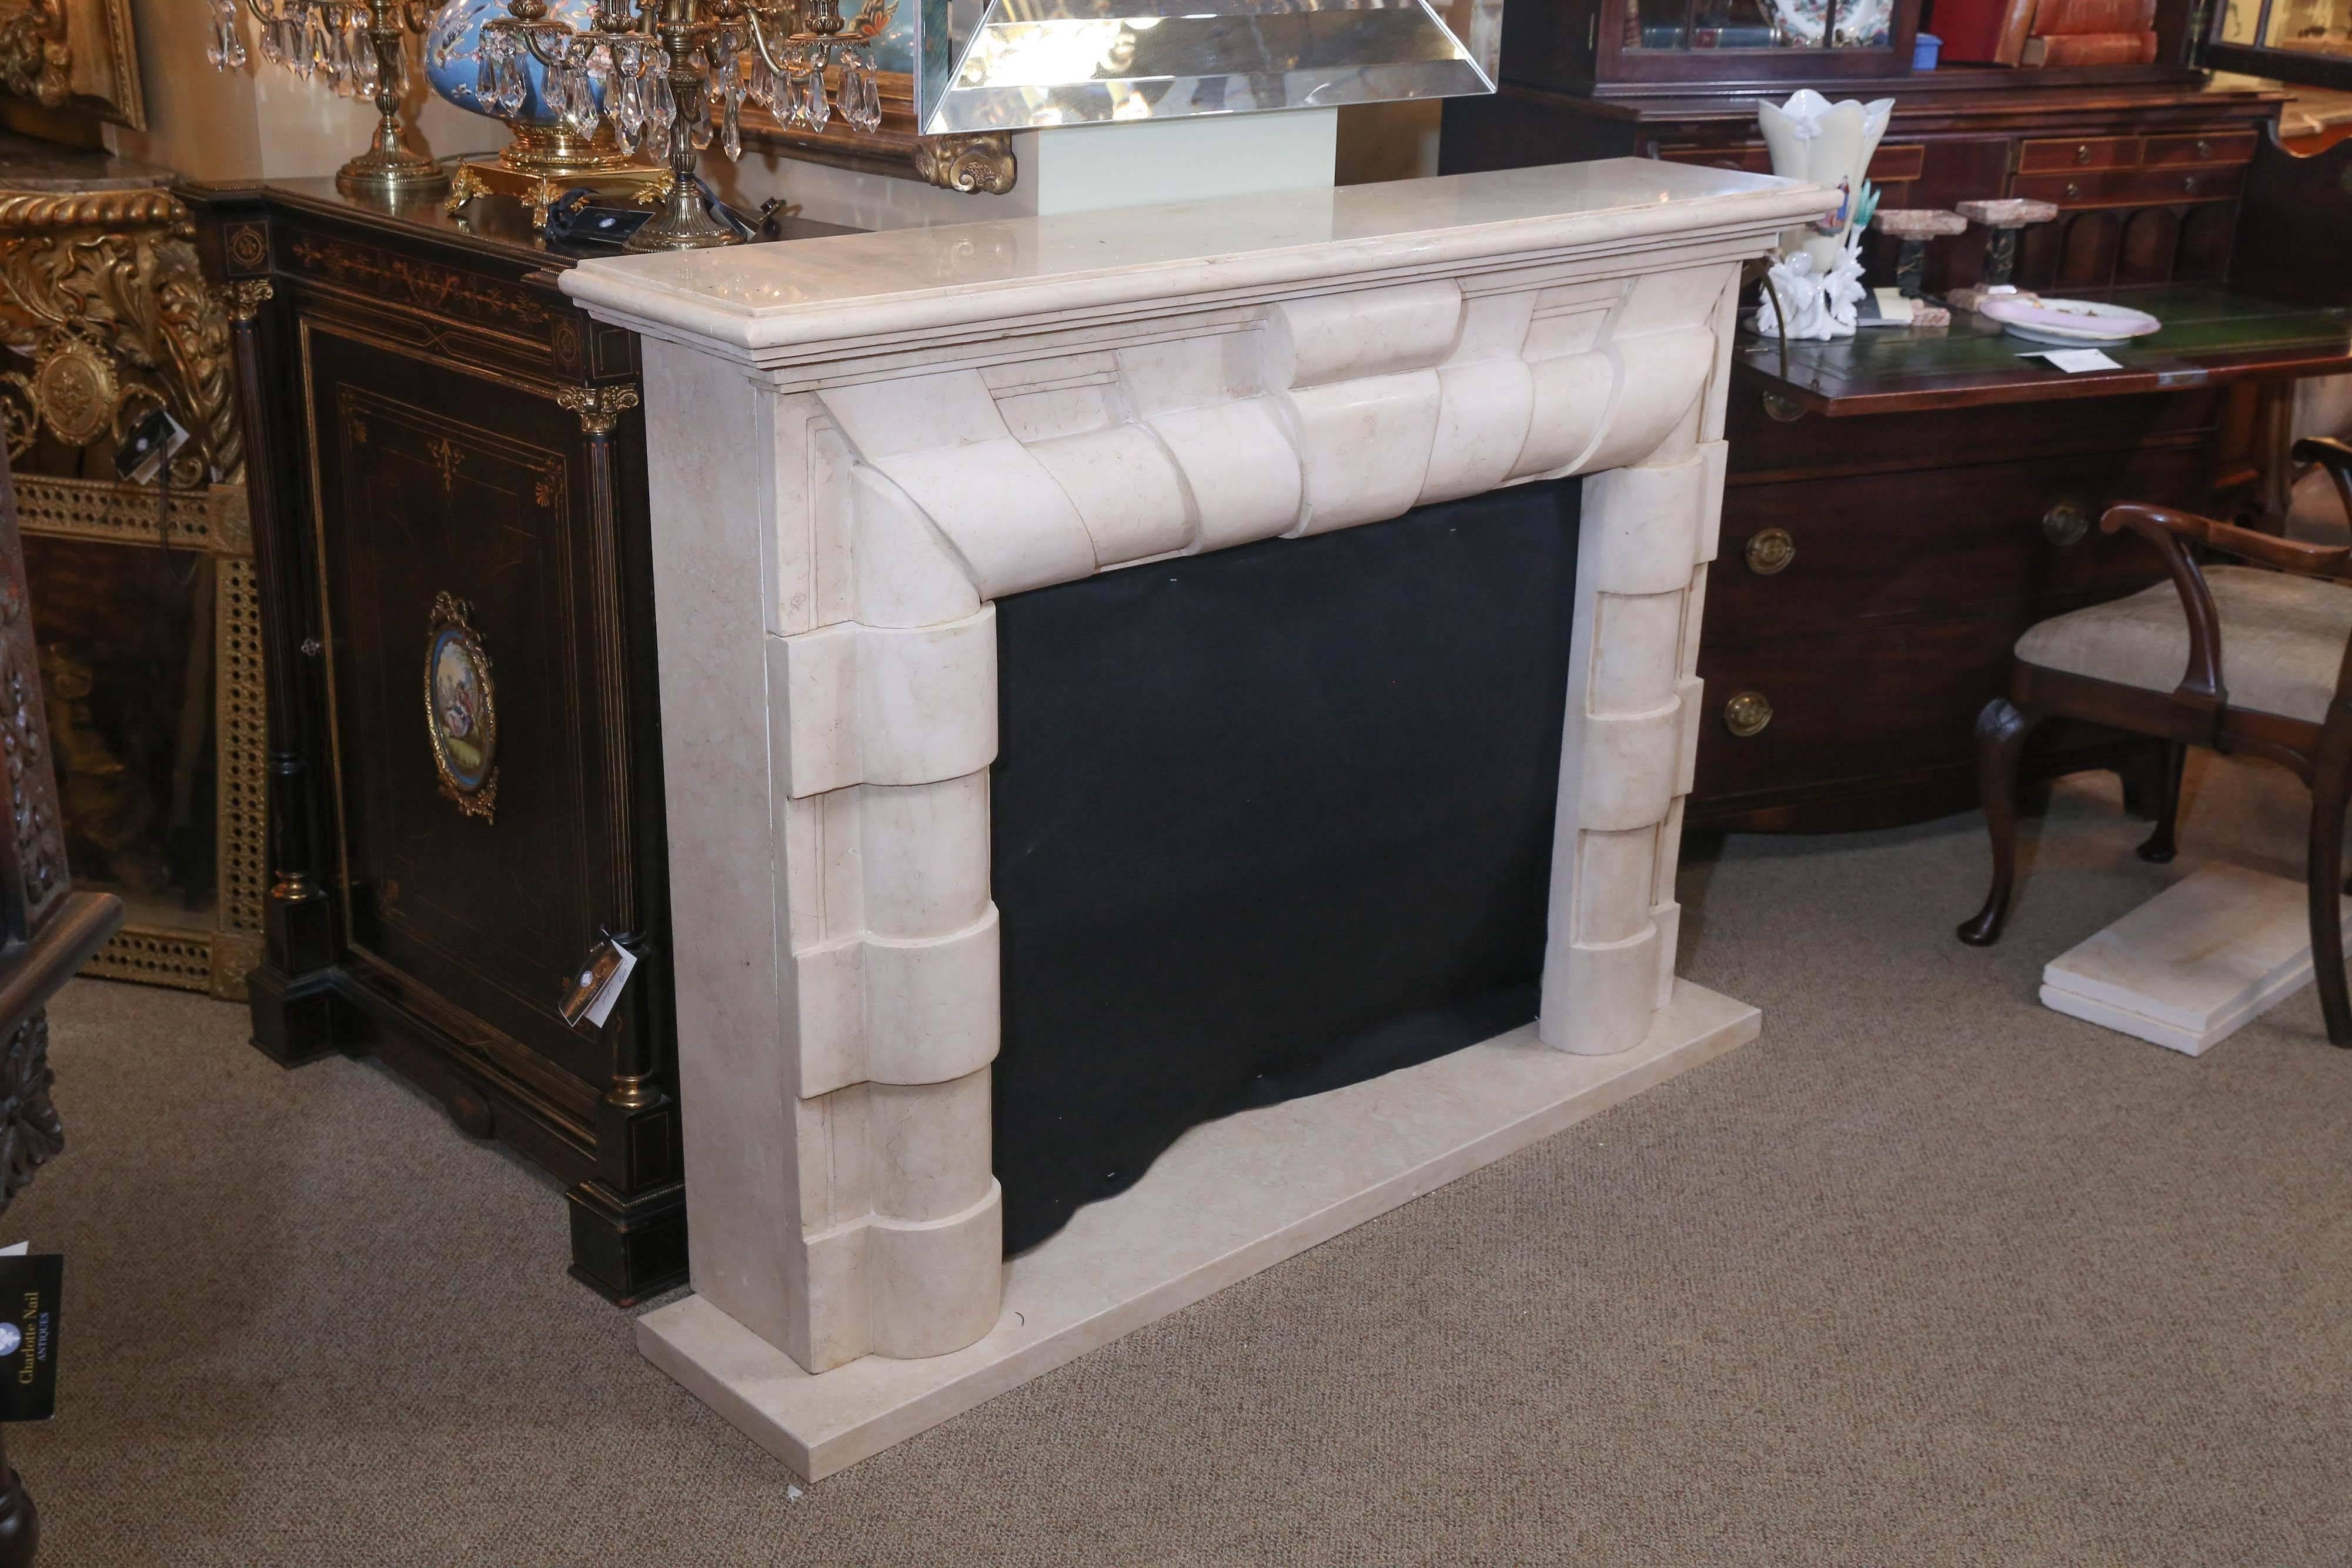 Art Deco style mantel carved in real marble that has been beautifully crafted.
New mantel with great style. Hearth is provided and this comes apart in five
pieces for easy shipping.